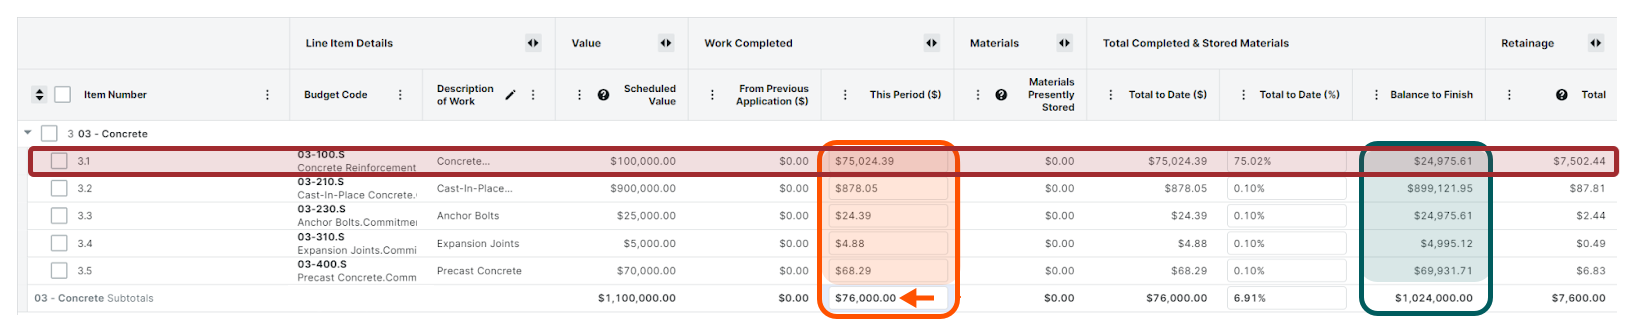 billing-with-prefilled-costs-from-sub-invoices-direct-costs.png